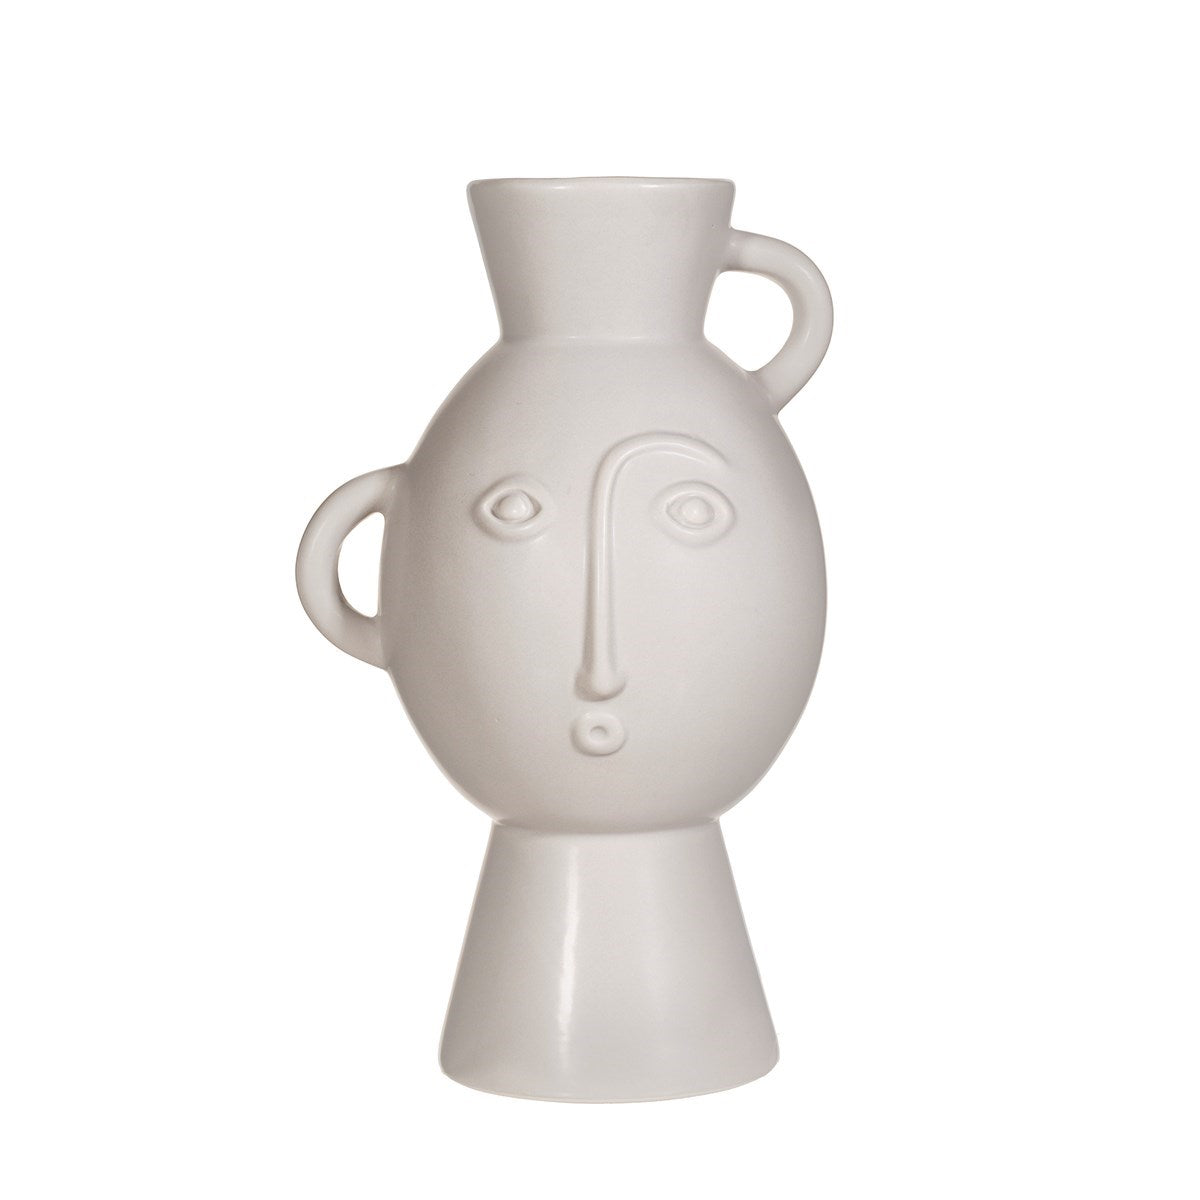 Face vase with handles